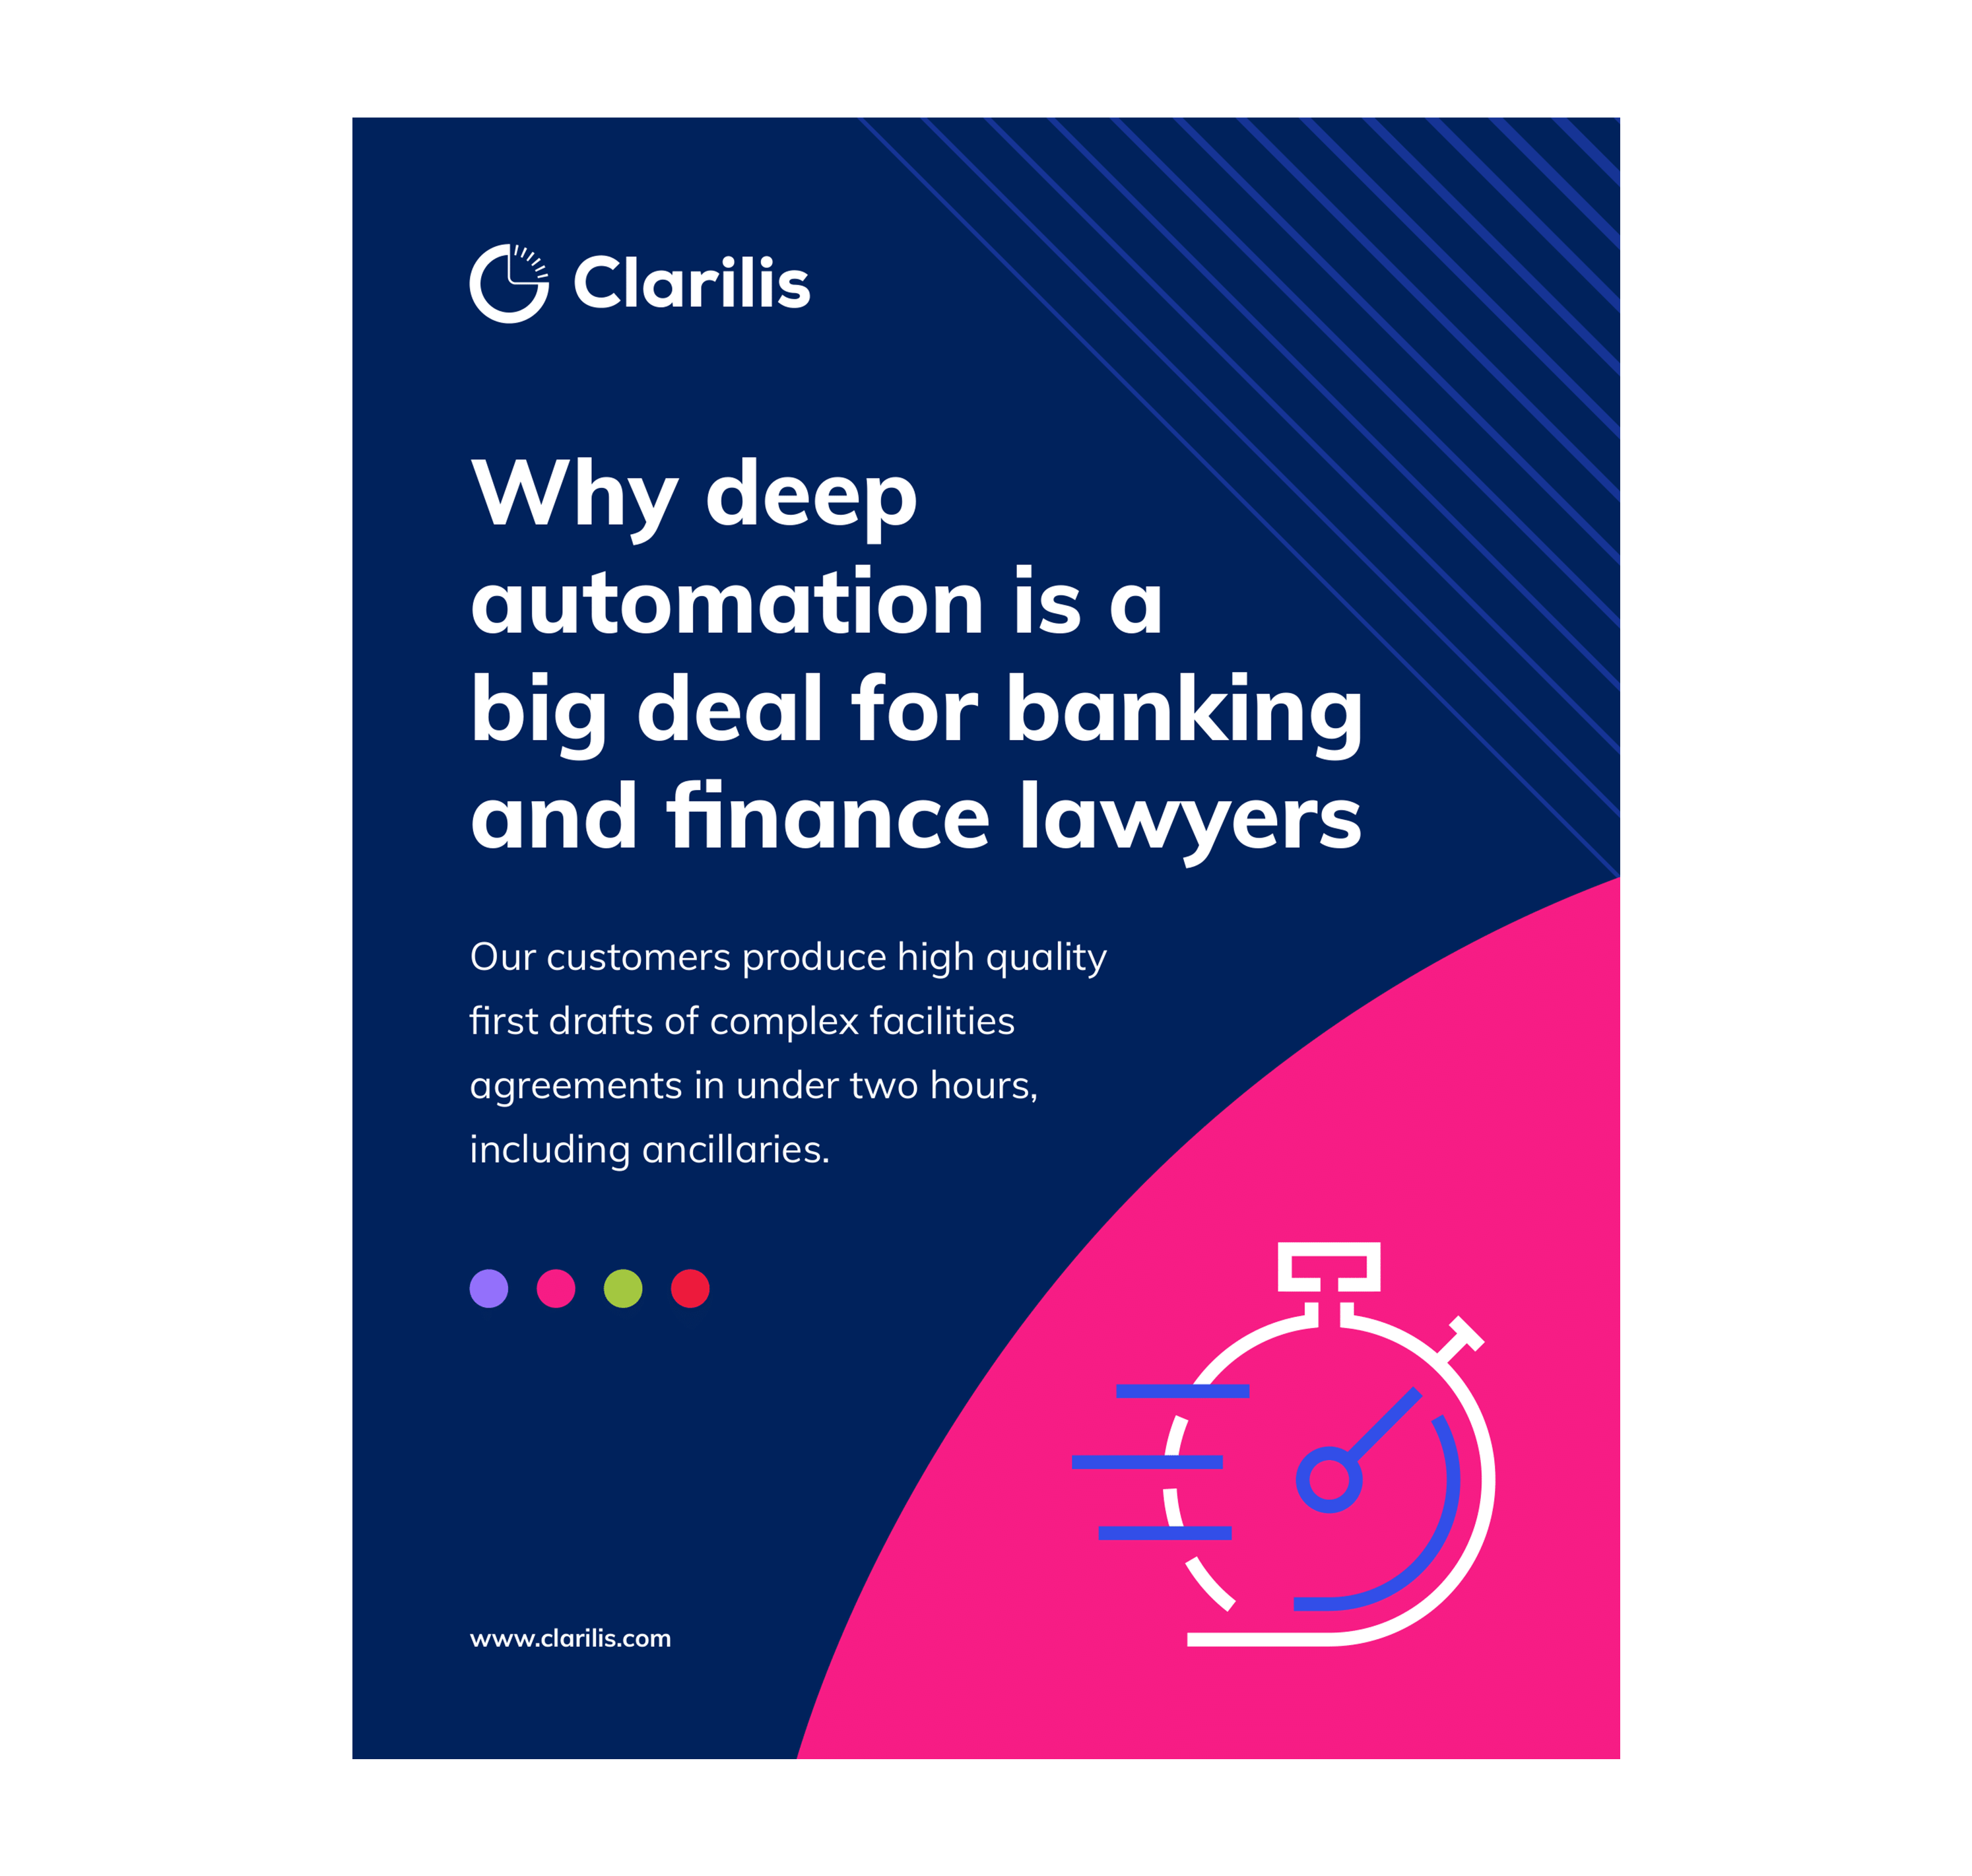 Clarilis - Why deep automation is a big deal for banking and finance lawyers-01-